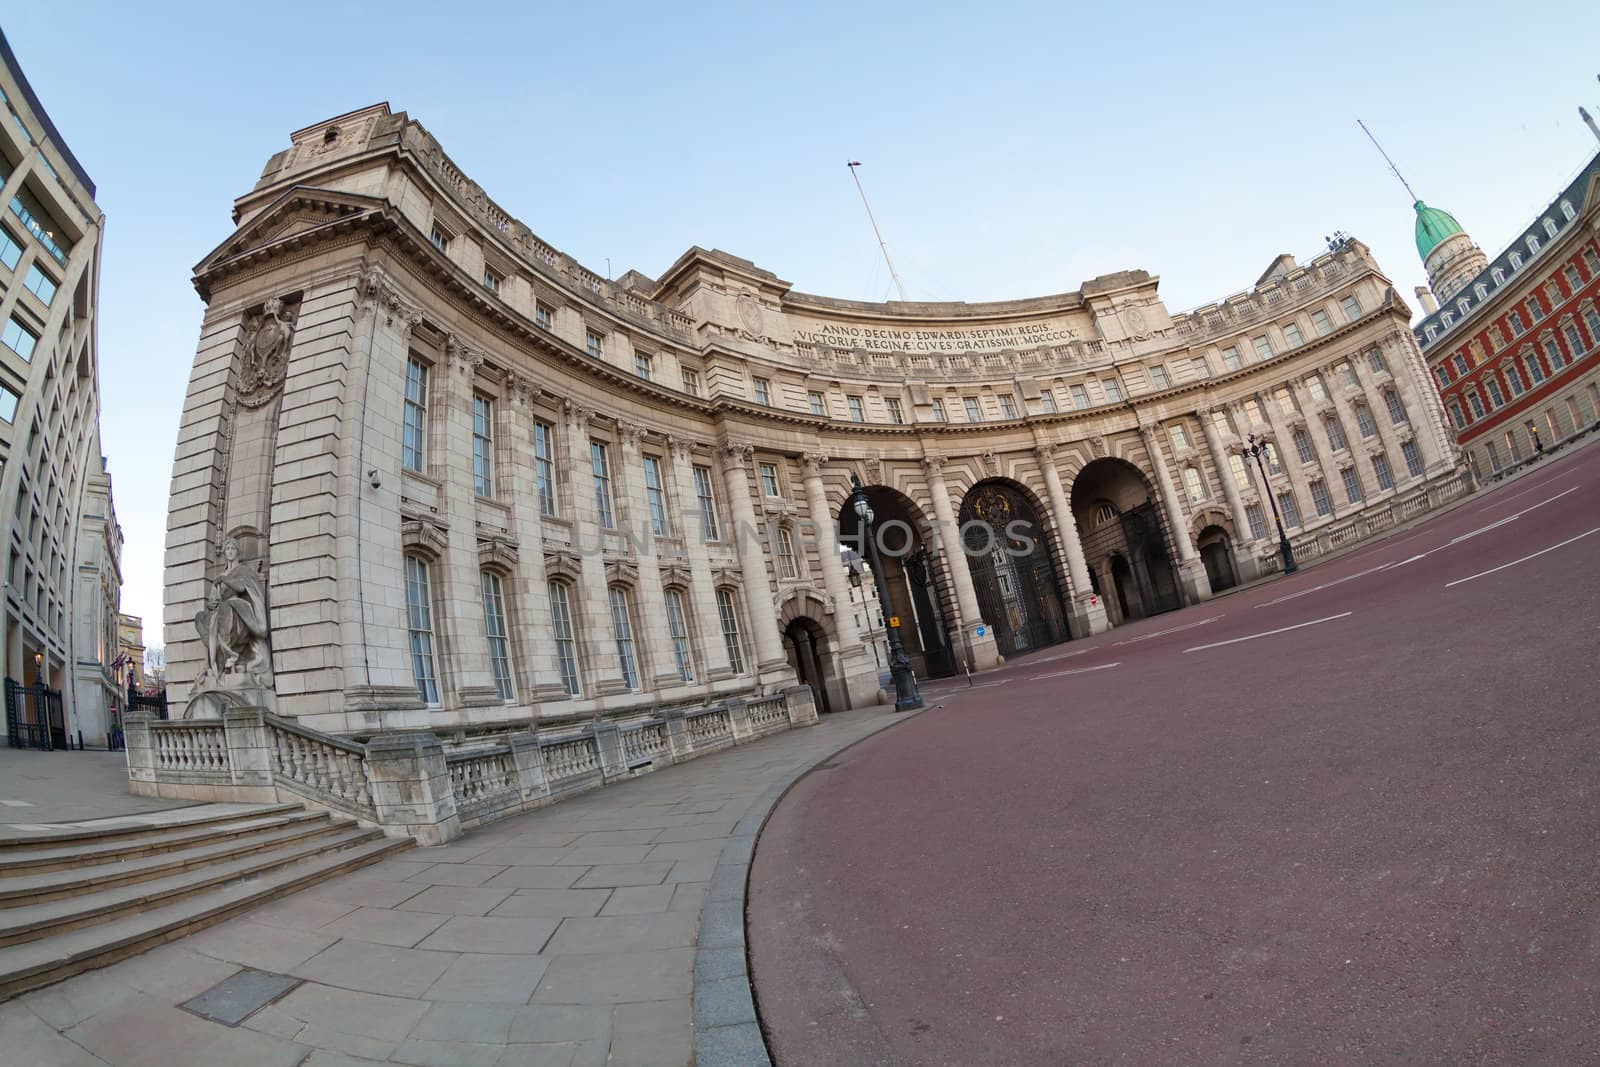 Admiralty Arch, The Mall, London, England, UK by Antartis